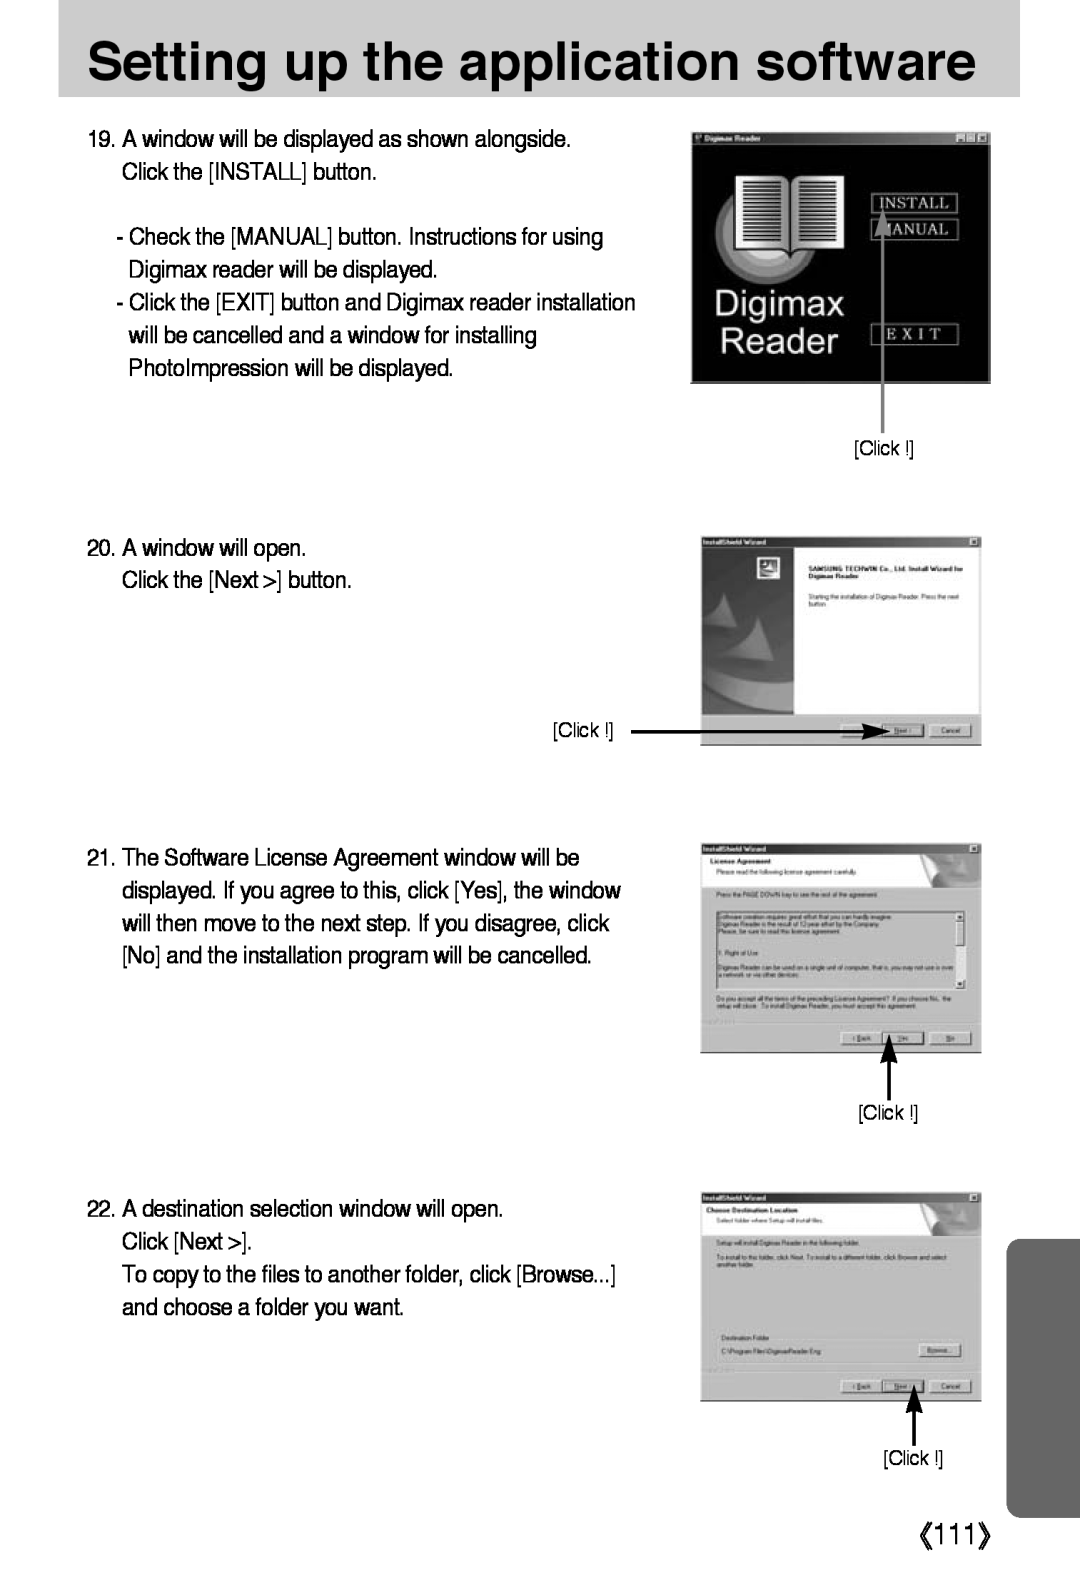 Samsung L50 user manual 《111》, Setting up the application software 